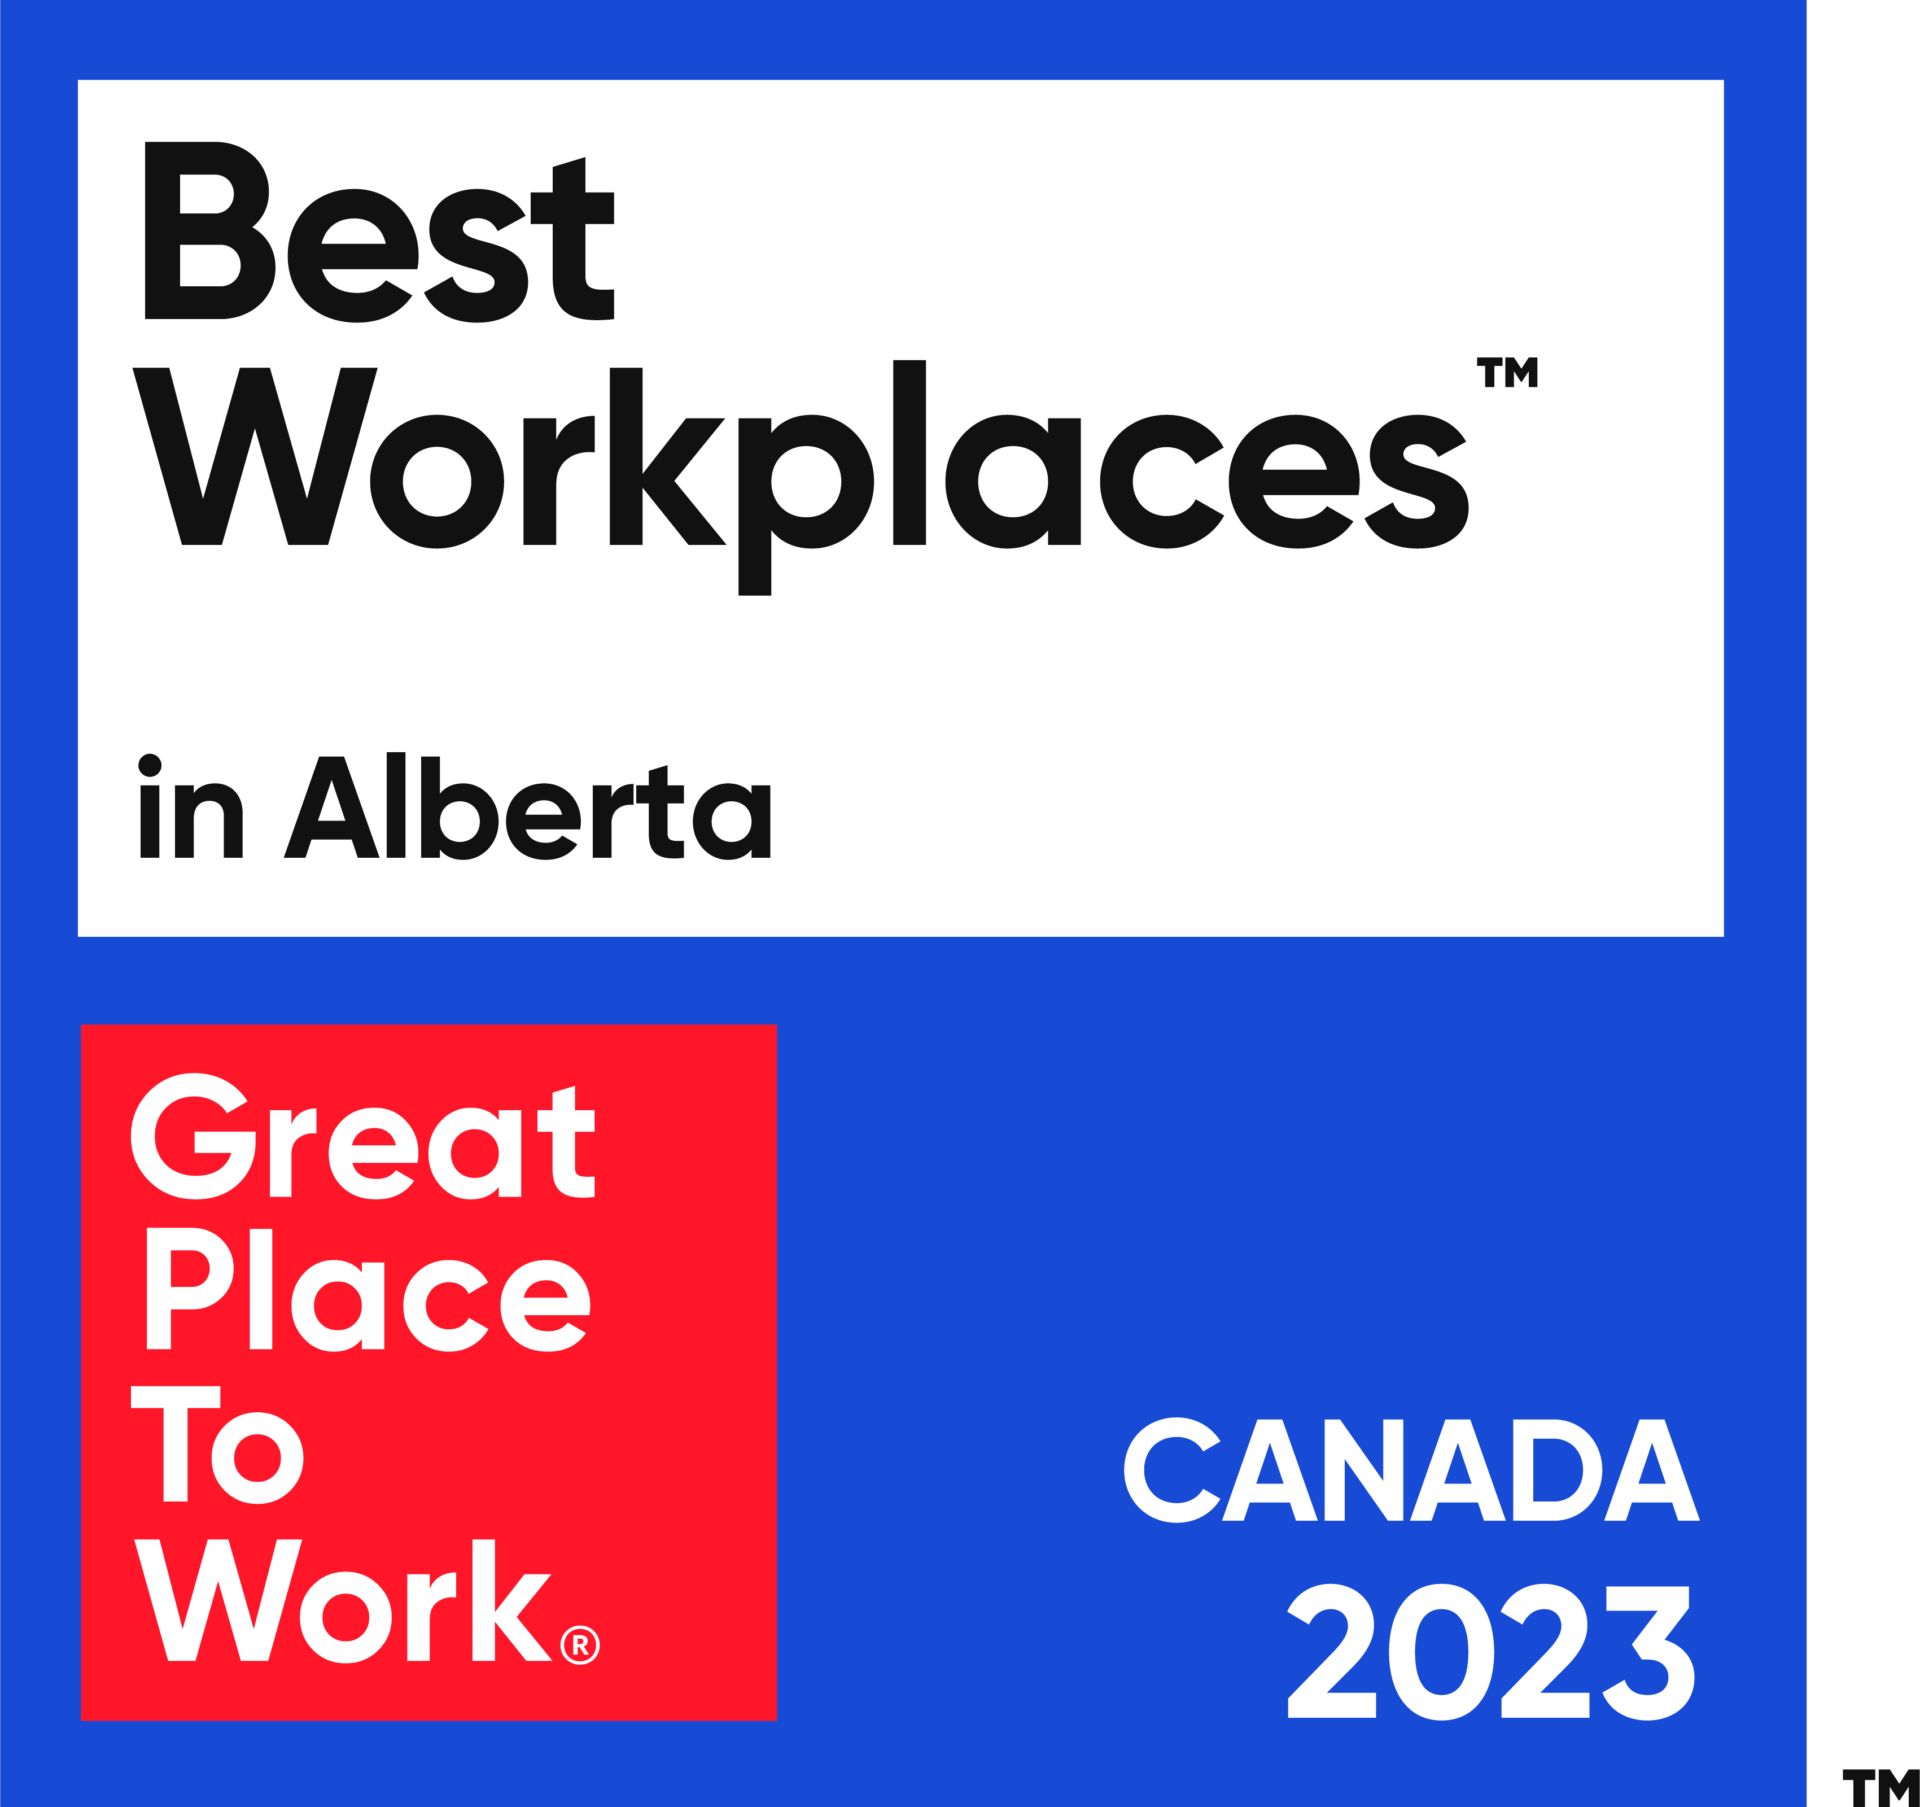 Elantis recognized as one of the 2023 Best Workplaces™ in Alberta!